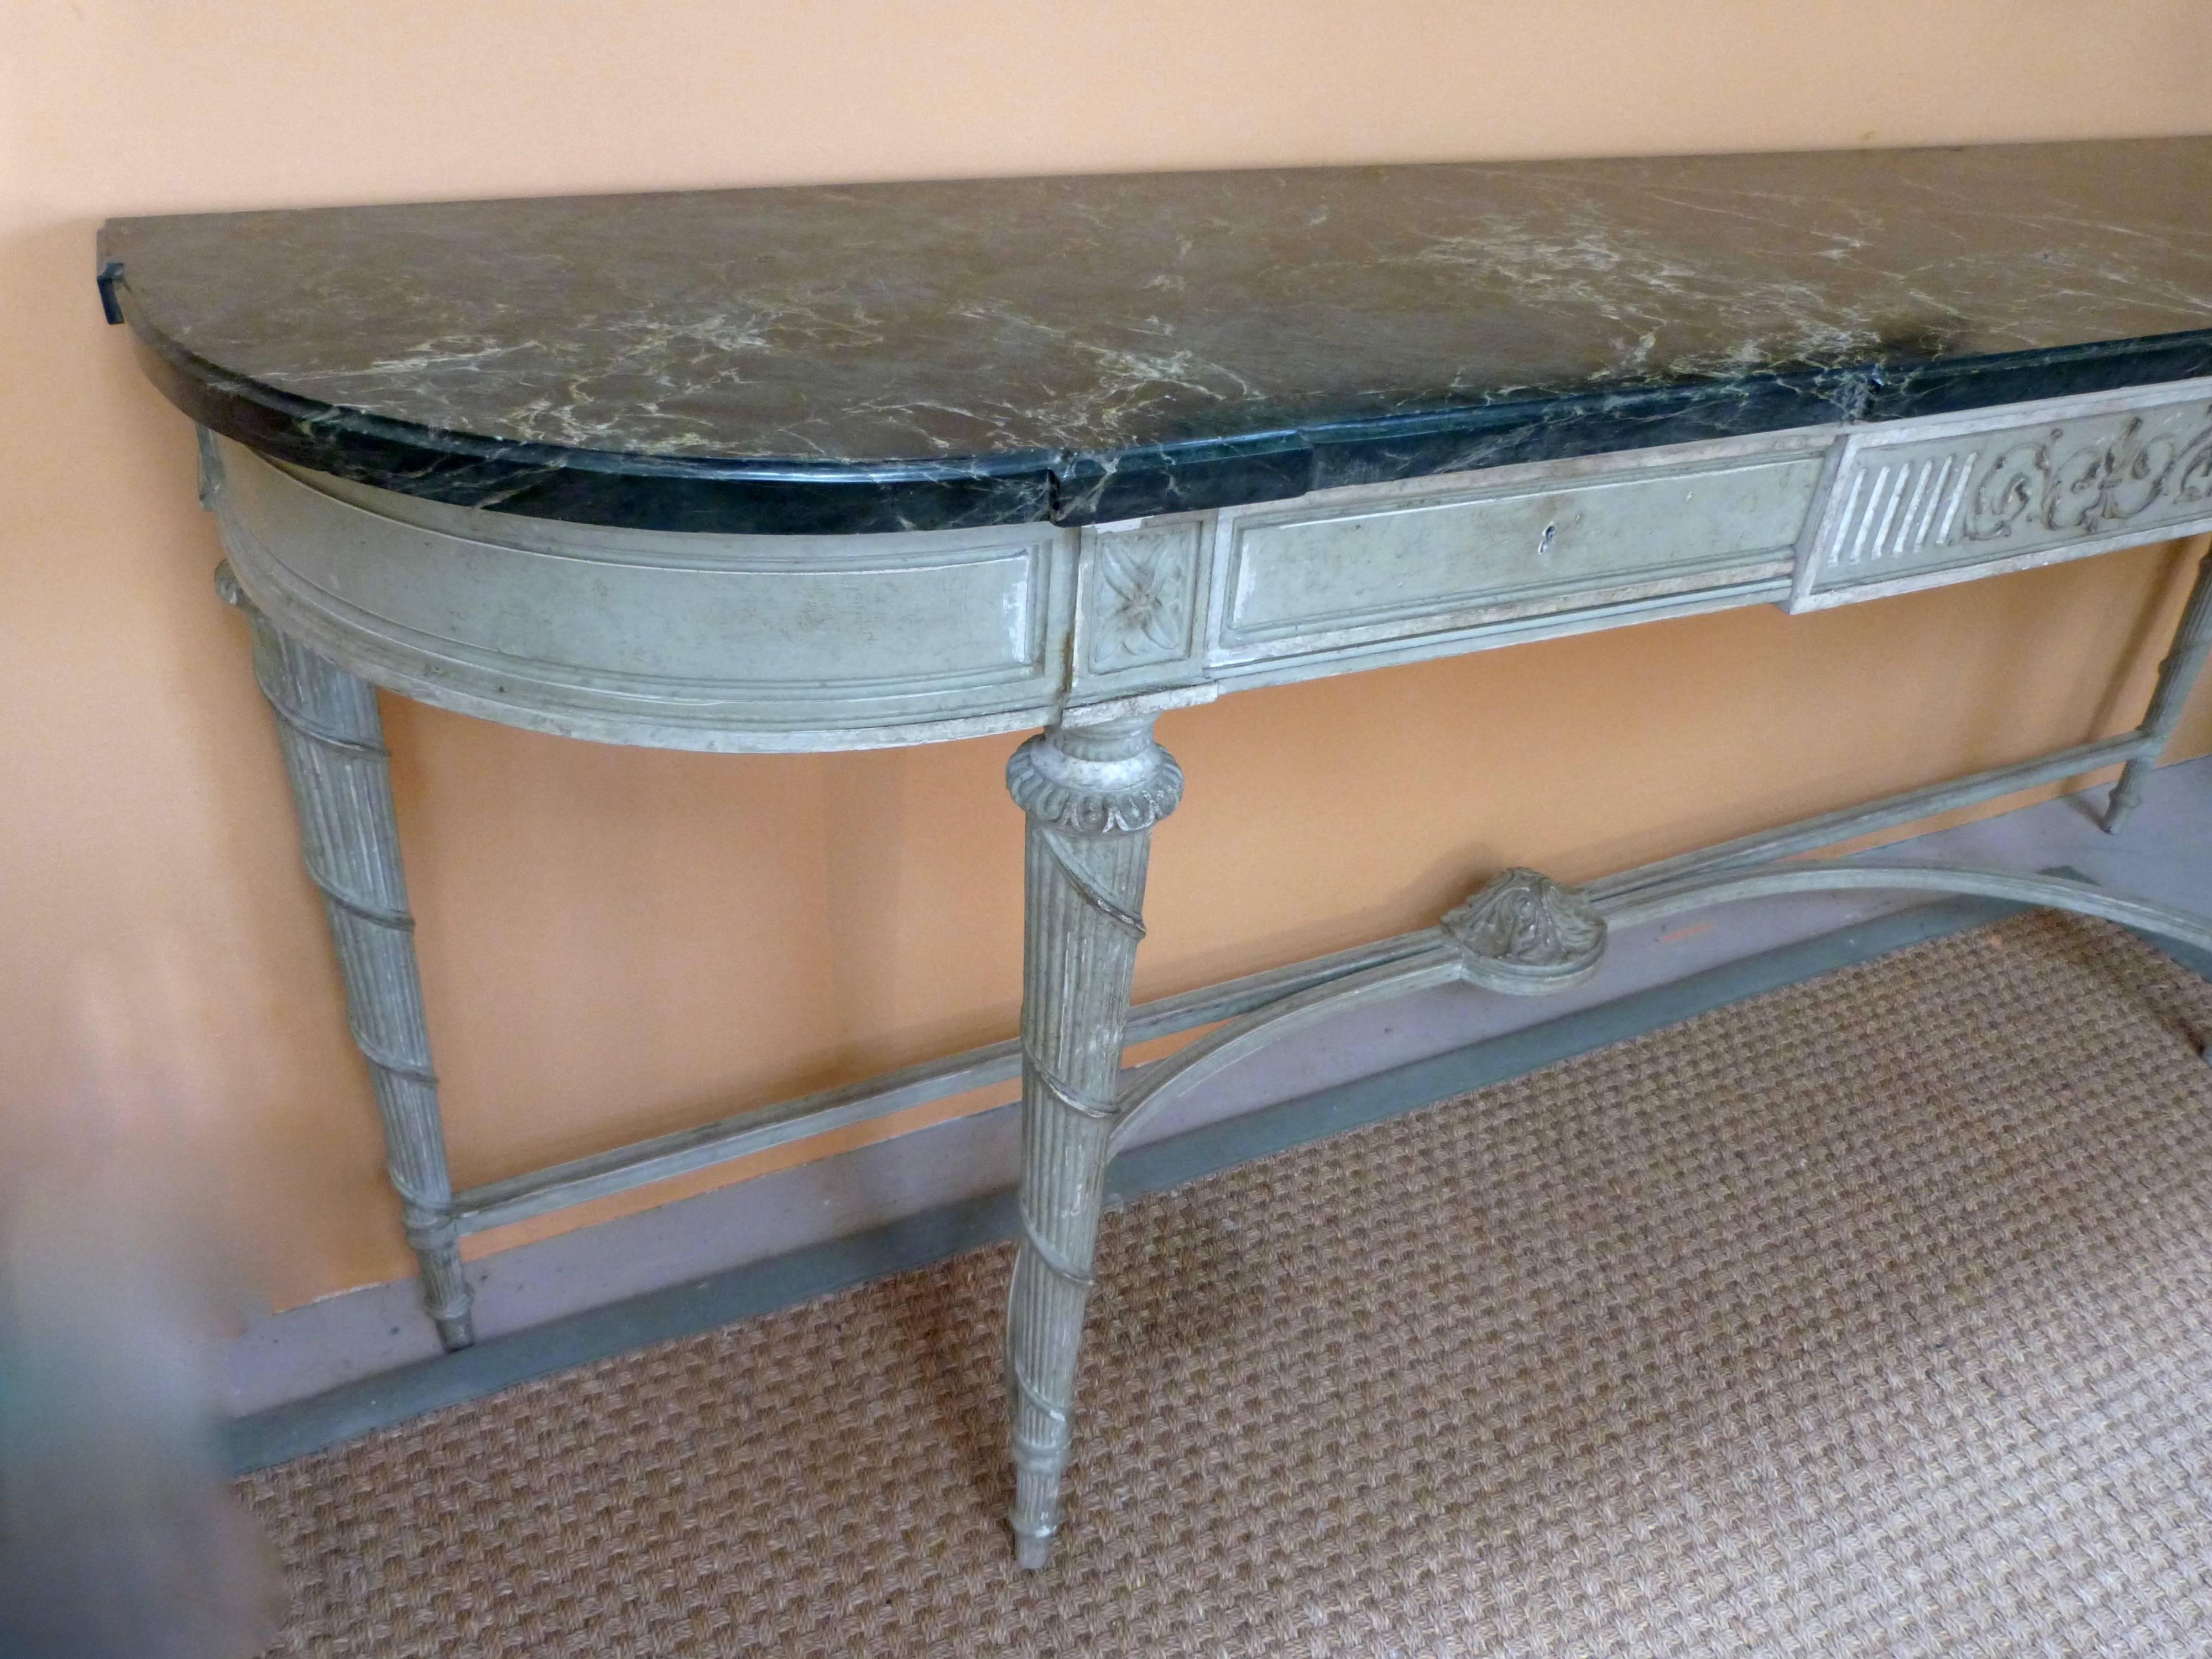 A very decorative early 20th century French painted console table.